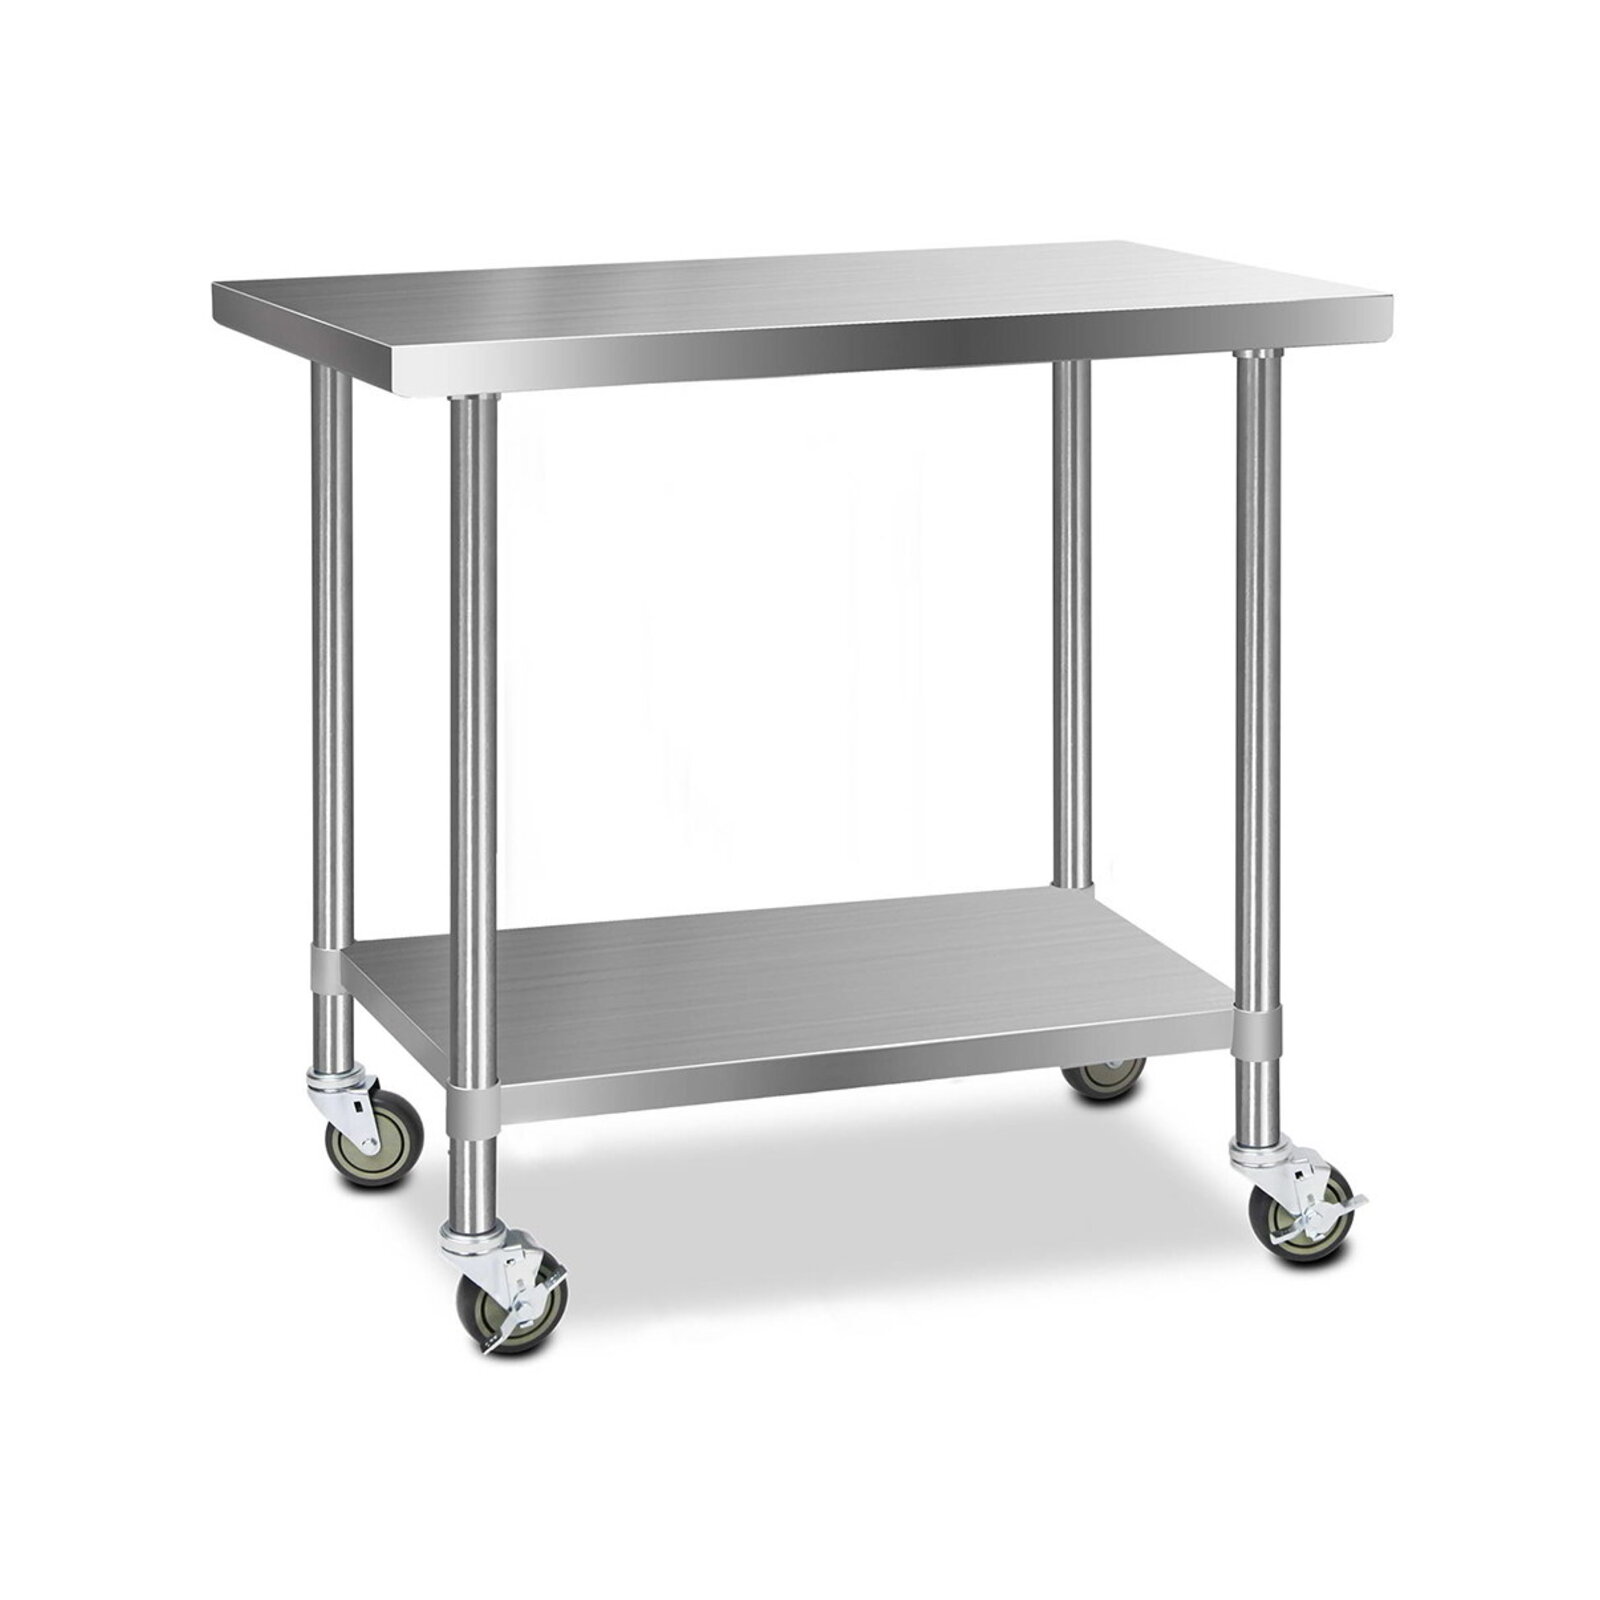 Cefito 1219x610mm Commercial Stainless Steel Kitchen Bench w/ Wheels ...